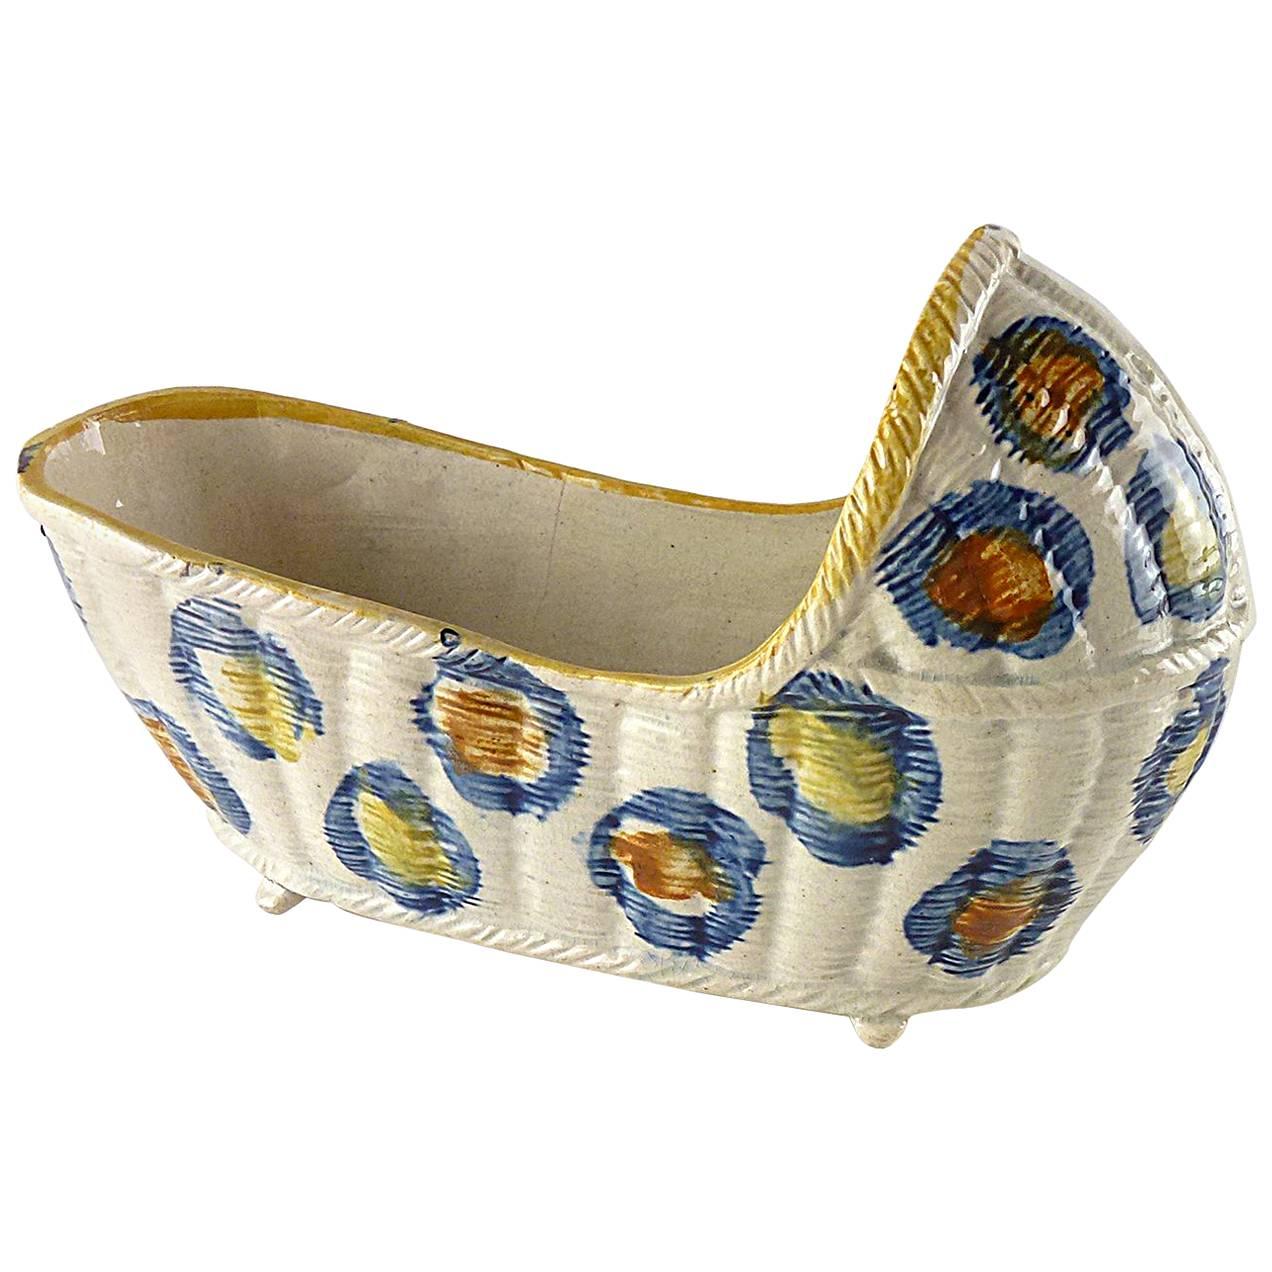 English Staffordshire Pearlware Prattware Model of a Cradle For Sale